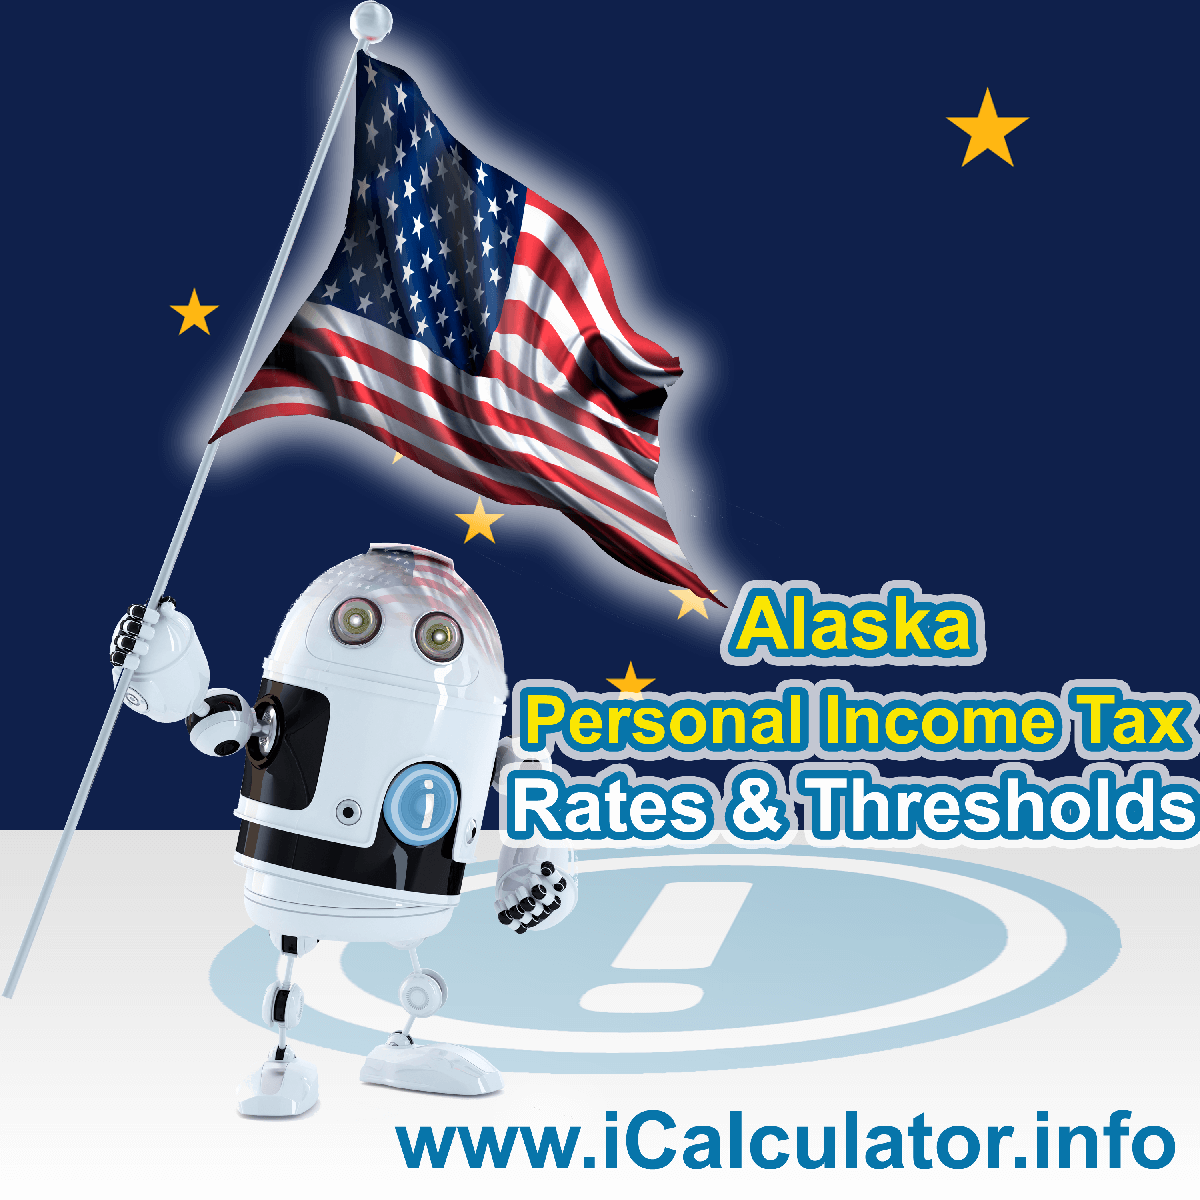 Alaska State Tax Tables 2018. This image displays details of the Alaska State Tax Tables for the 2018 tax return year which is provided in support of the 2018 US Tax Calculator